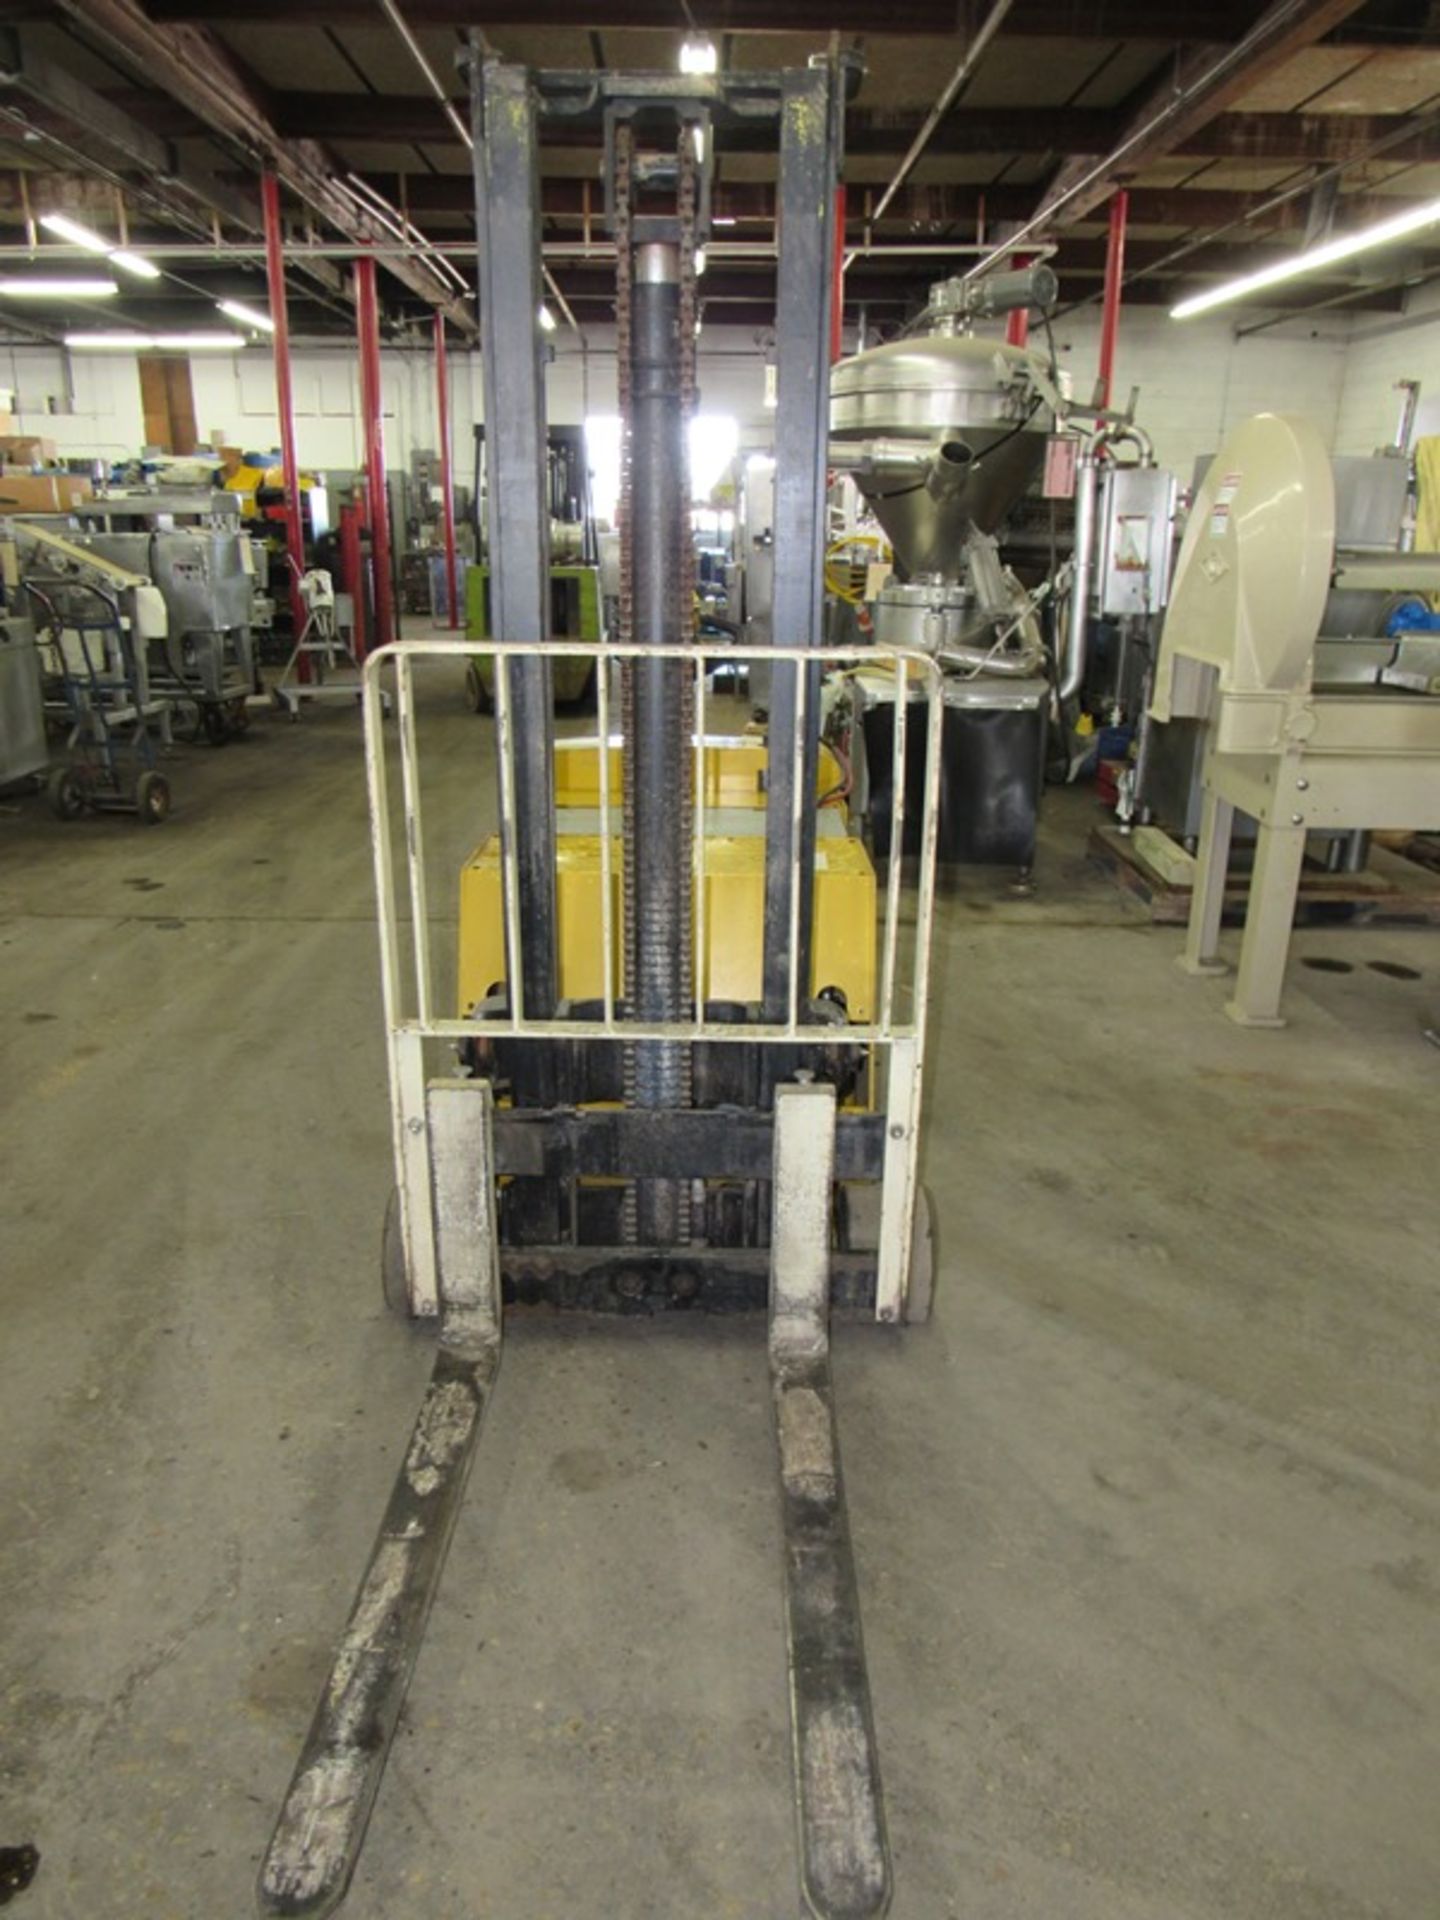 Yale Mdl. MCW040LEN24V083 Walkie Stacker Lift, 2 stage mast, 4000 Lb. lift capacity, 24 volt - Image 5 of 8